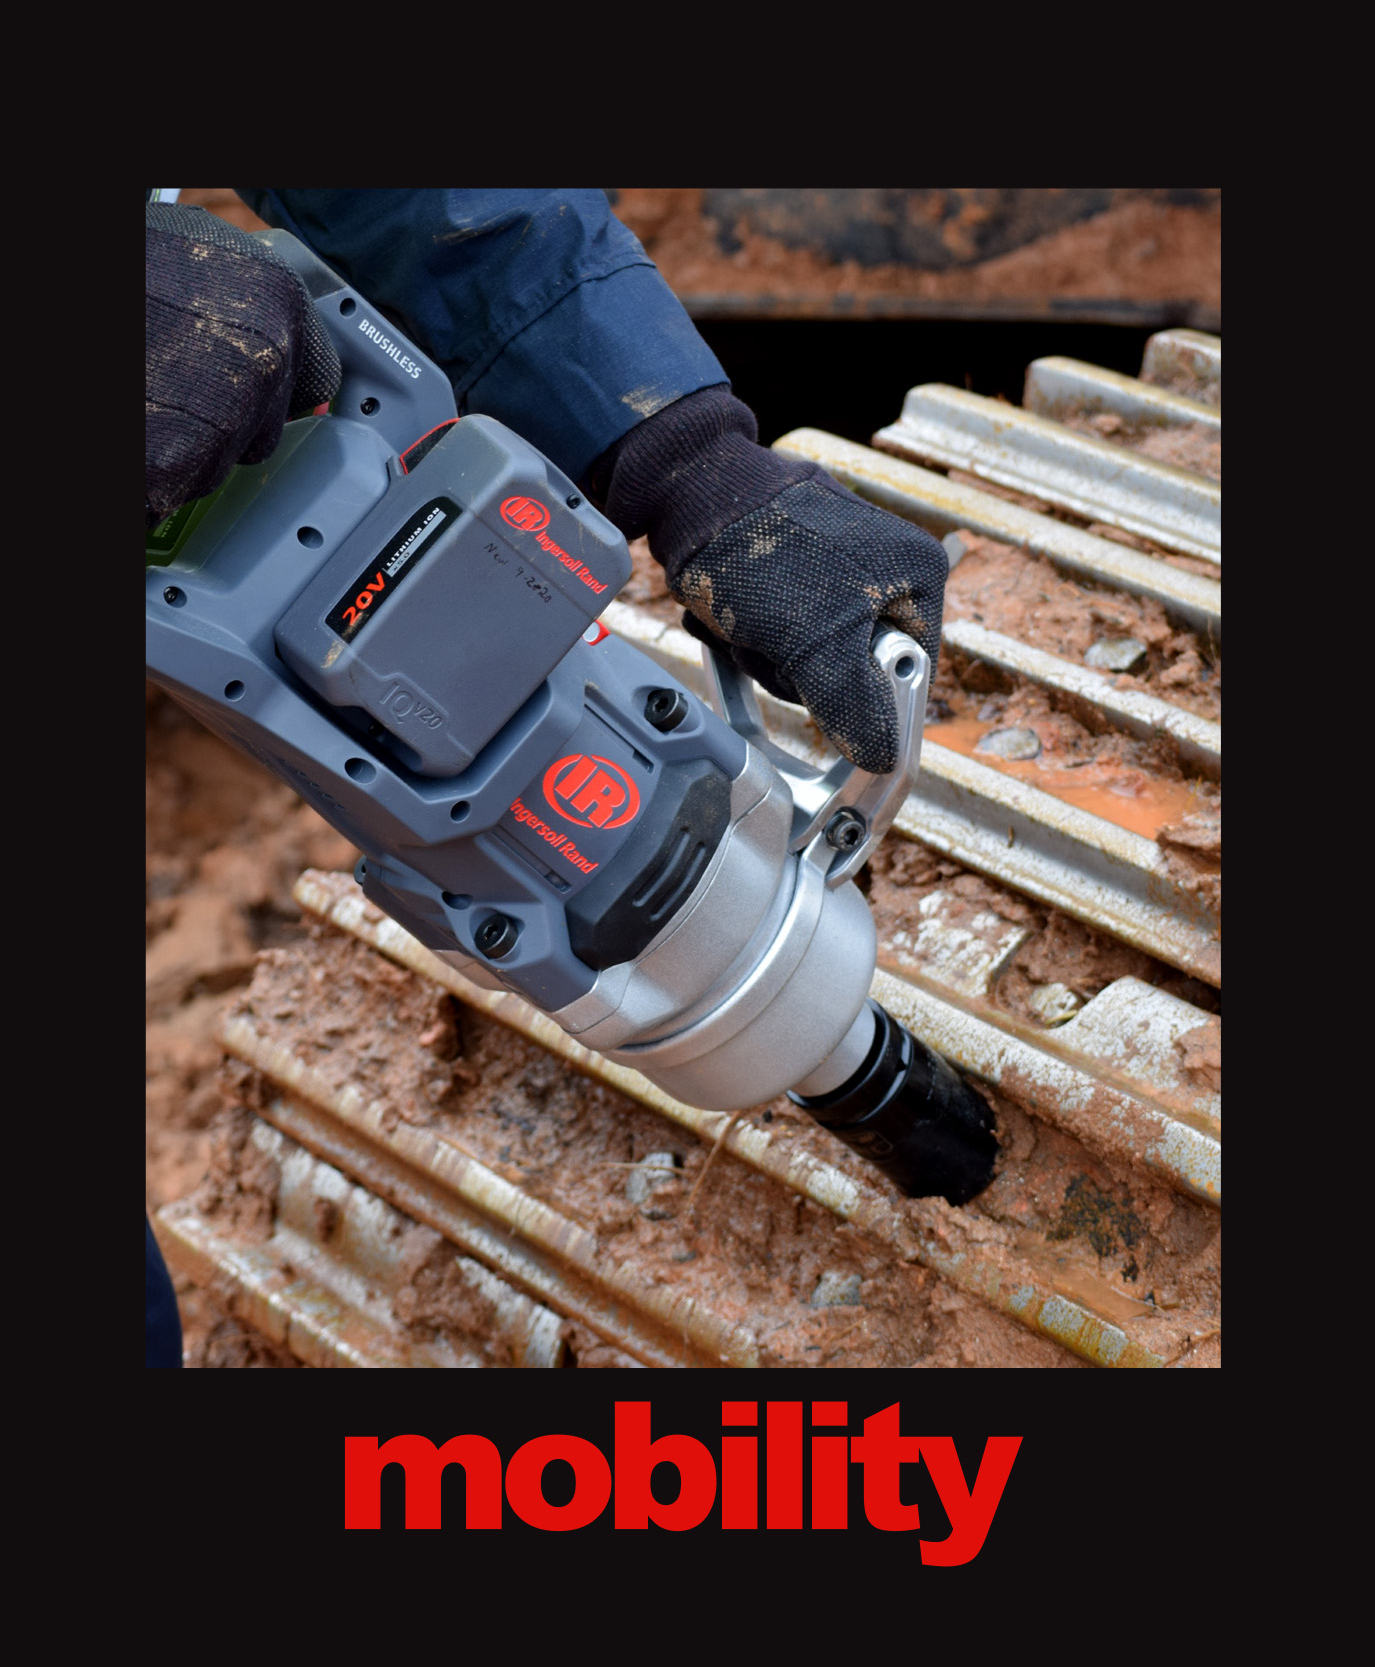 Ingersoll Rand Cordless Impact Wrench - Mobility